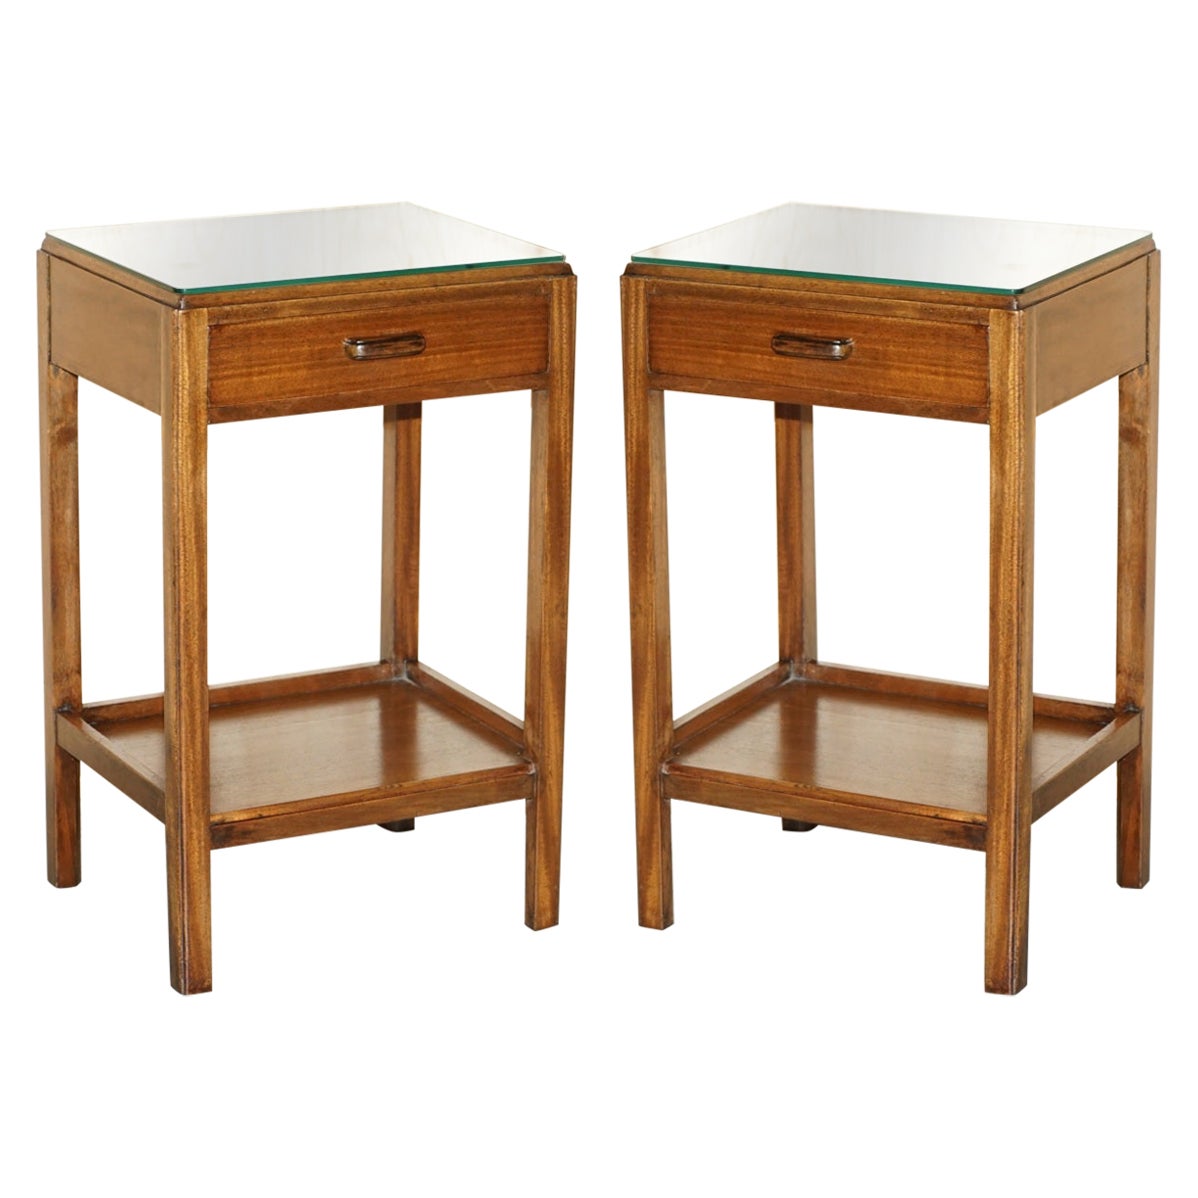 Pair of Tall Moss Partners 1952 Mid-Century Modern English Oak Side End Tables